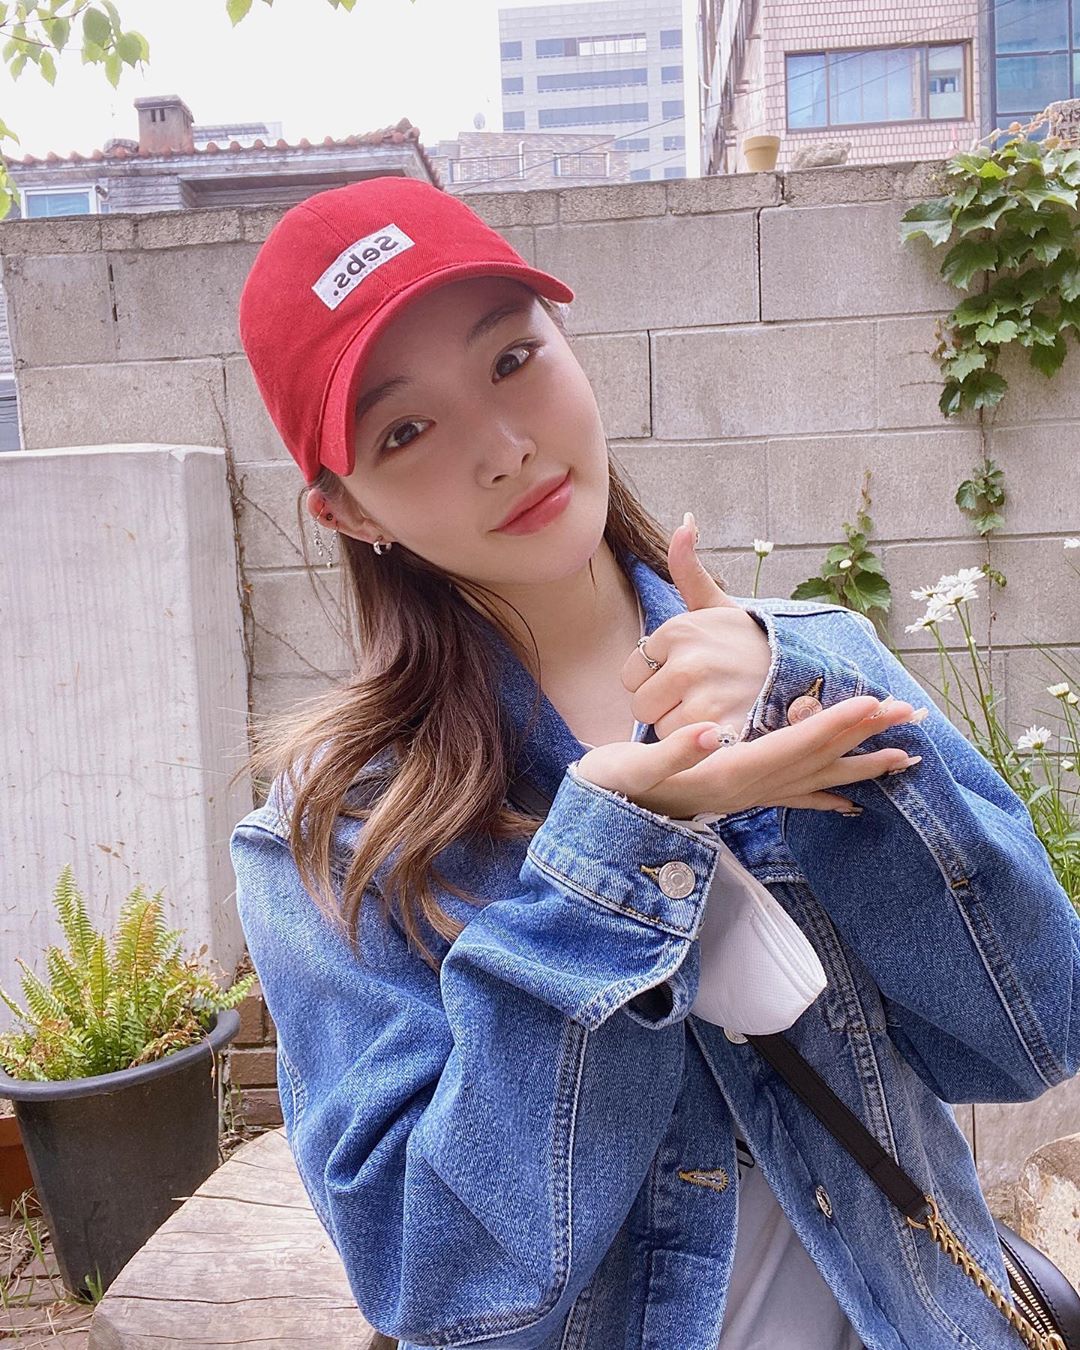 Singer Chungha joined the Lindsey Vonn thanks to its indseyChungha told the official Instagram on the 5th, Hello, its Singer Chungha! Ive been involved in meaningful things with the signature of Singer Polkim.At this moment, I am sending a safe daily life thanks to the medical staff who are working hard at the forefront. I am grateful and respectful for the sacrifice and hard work of the medical staff who are doing their best day and night against Corona 19.Zion.T senior, DIA Hee Hyun, Bandits Yiyeon please keep warm heart.Thanks to the # medical staff # Thanks to the challenge # Campaign and pointed to Zion.T, DIA Hee Hyun, Bandits Yiyeon as the next runner.In the photo, Chungha smiles while posing with a thumb, and Chunghas daily fashion, which gave points with a blue jacket and a red color hat, attracts attention.Lindsey Vonn is a campaign to support medical staff who are present in the medical field to overcome the new corona virus infection (Corona 19).On April 27, Chungha released the Regular album Stay Tonight.Photo: Chungha Official Instagram